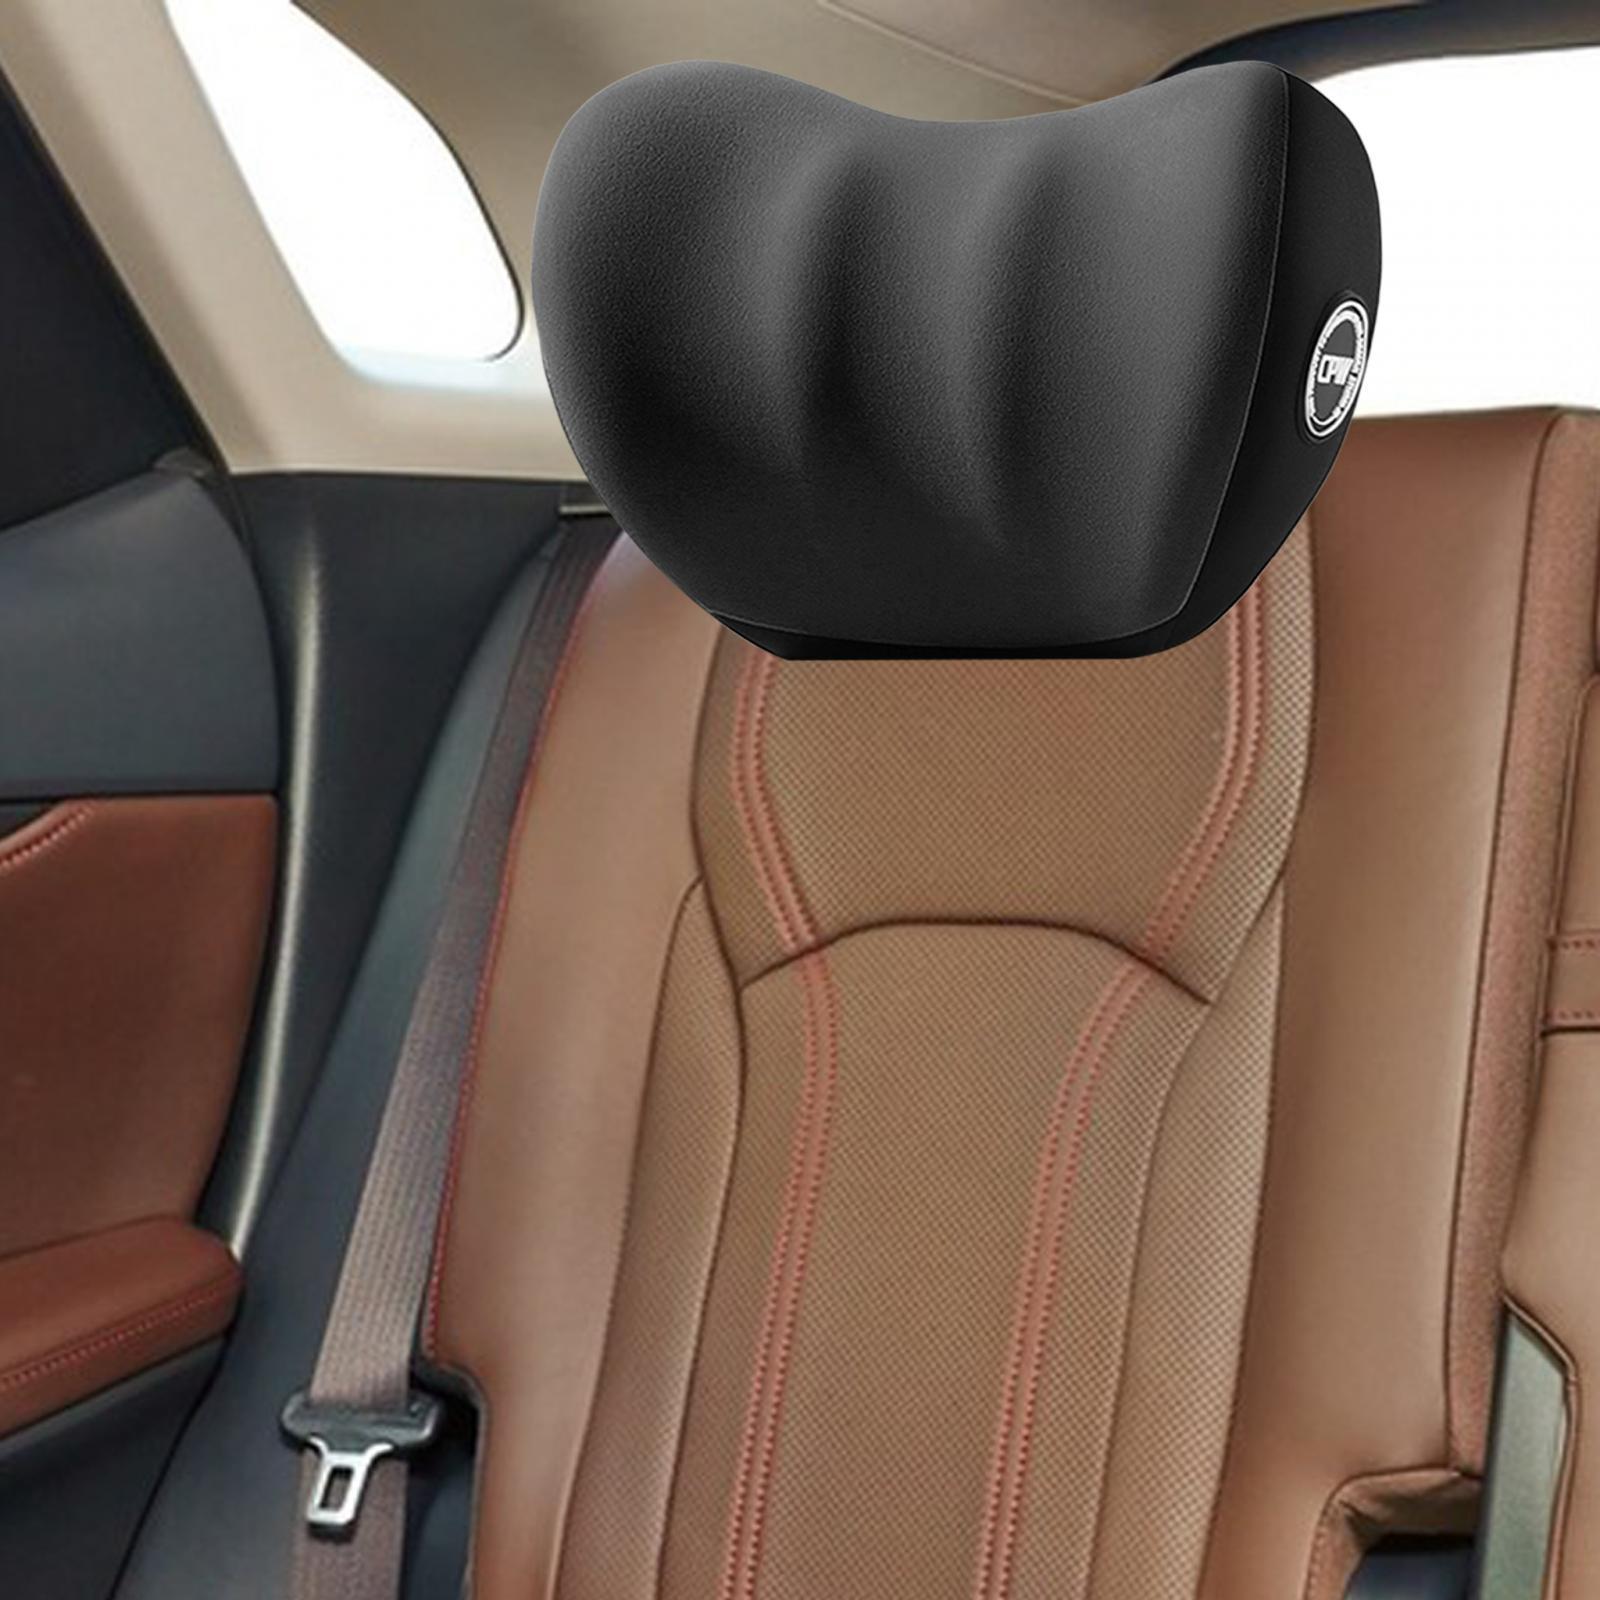 Car Neck Pillow  Car Neck Support Pillow for Byd Atto 3 Yuan Plus Black